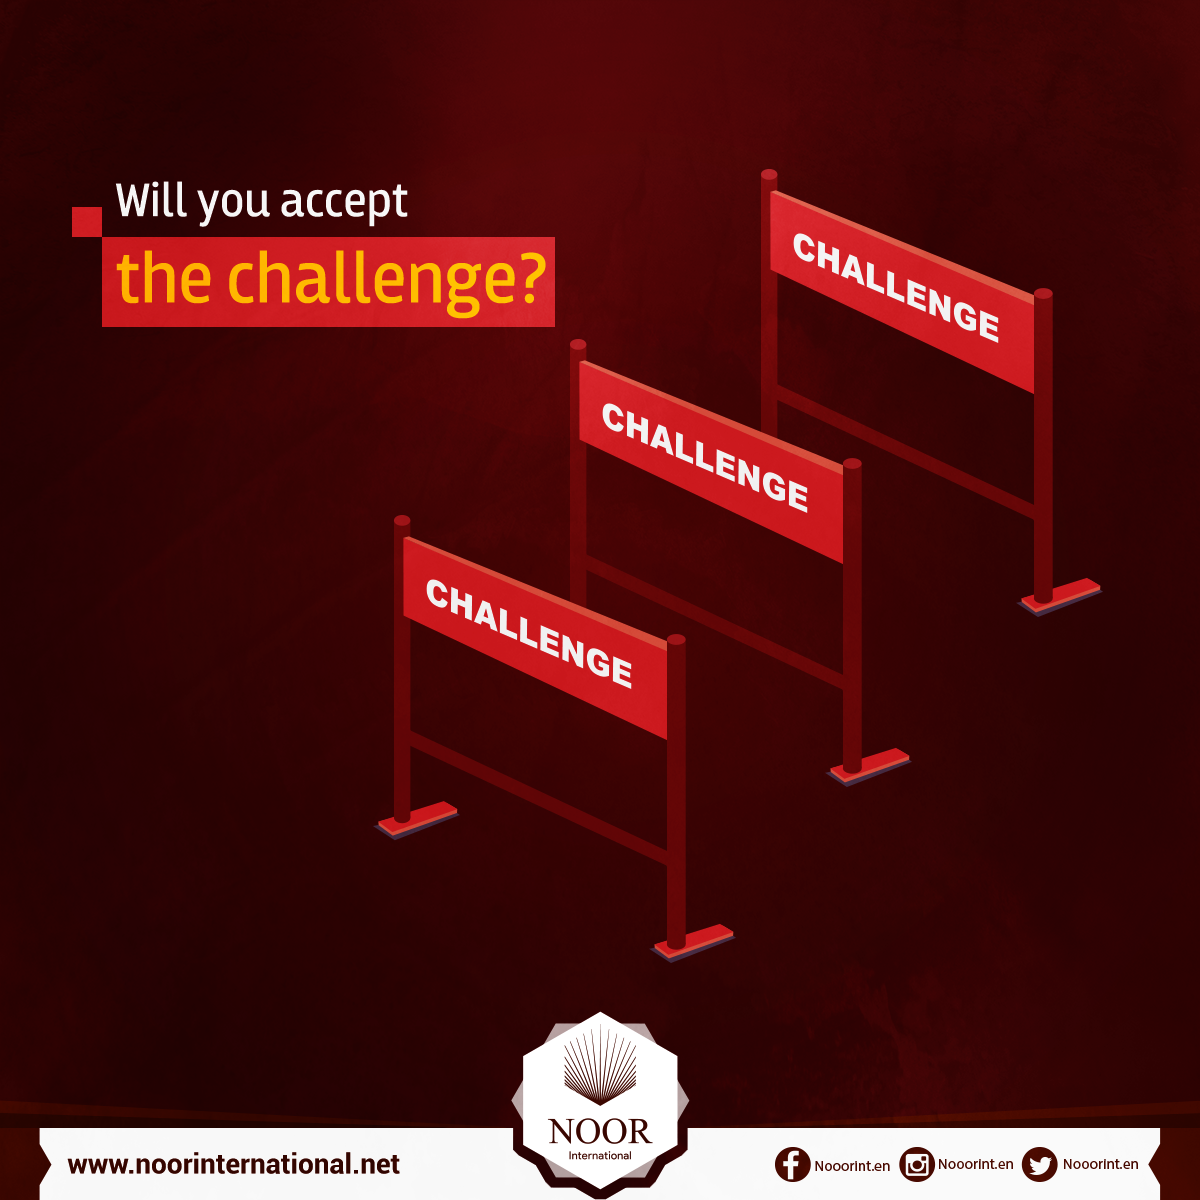 Will you accept the challenge?